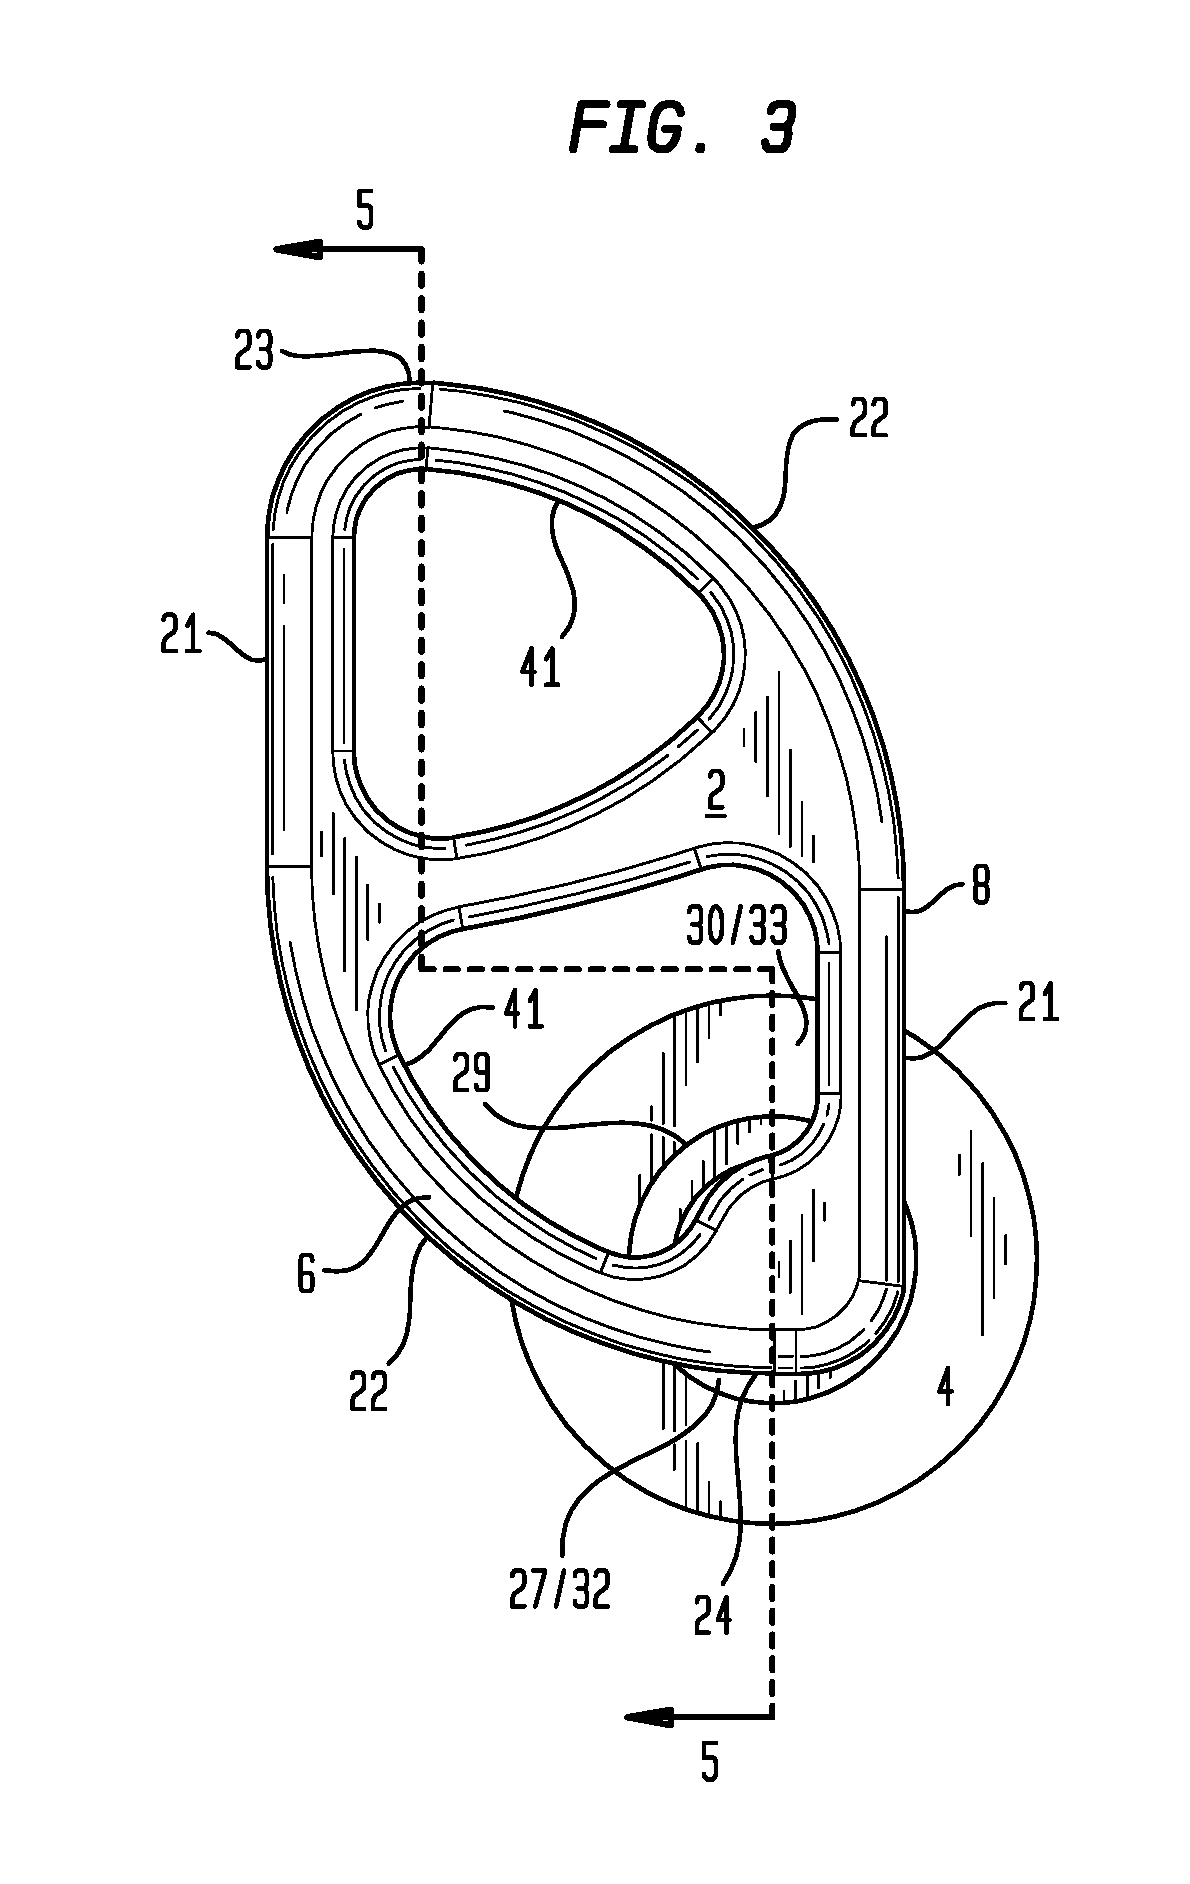 Earpiece intra-auricular support system